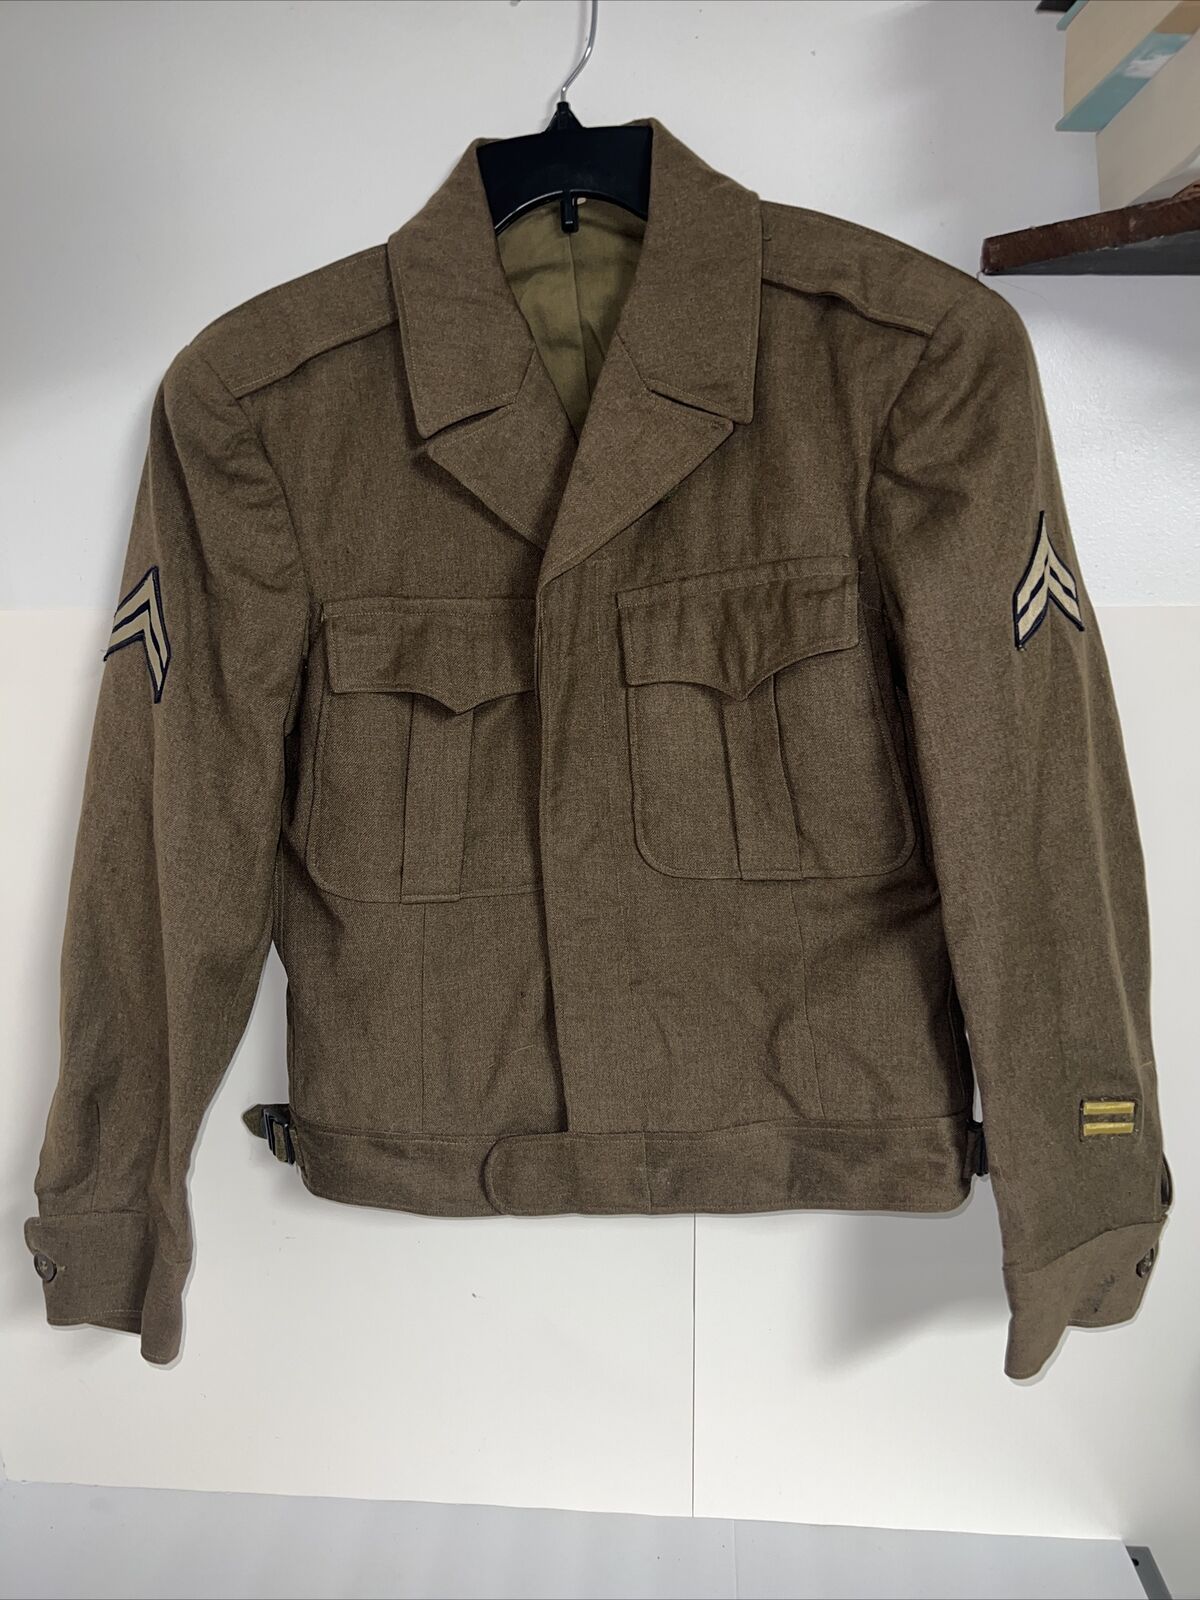 Vintage US Army Ike Jacket 1940s with Corporal’s and Overseas Stripes ...